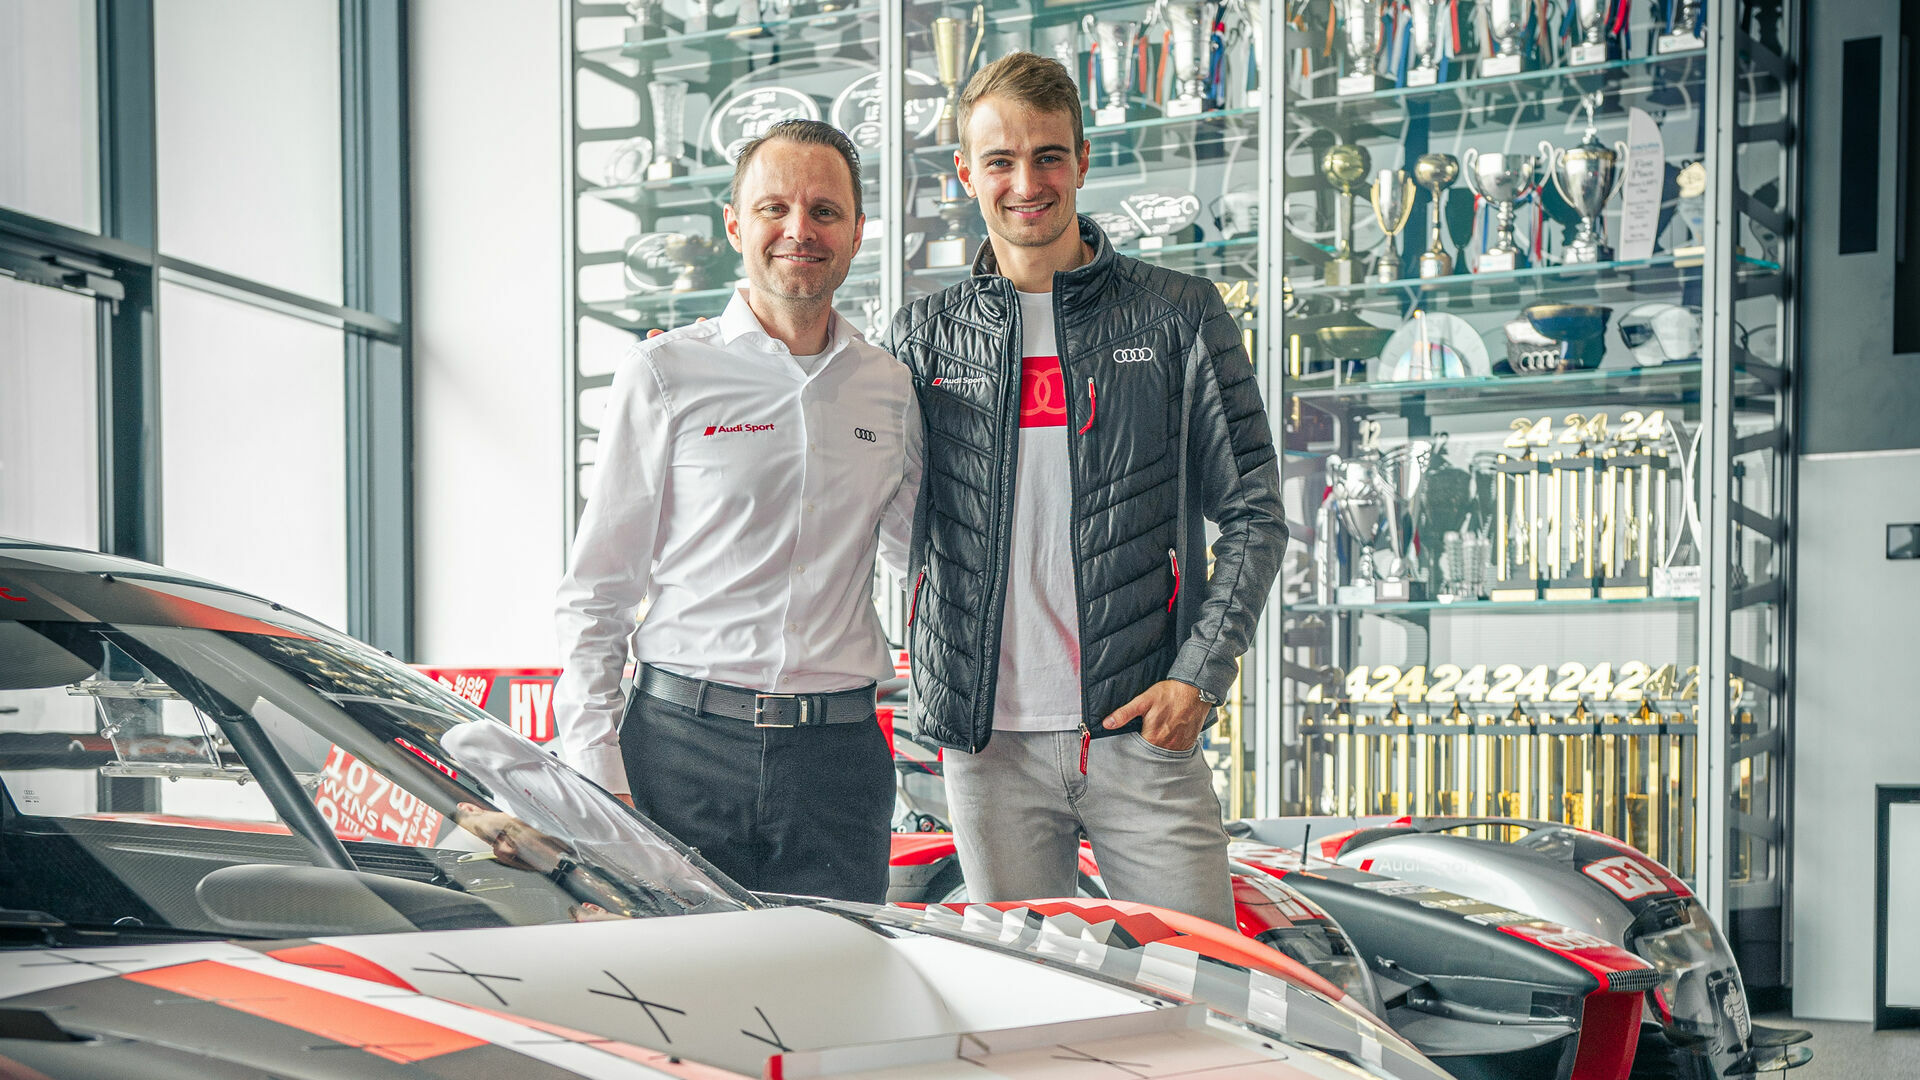 Audi says “Thank you very much and all the best, Nico Müller”